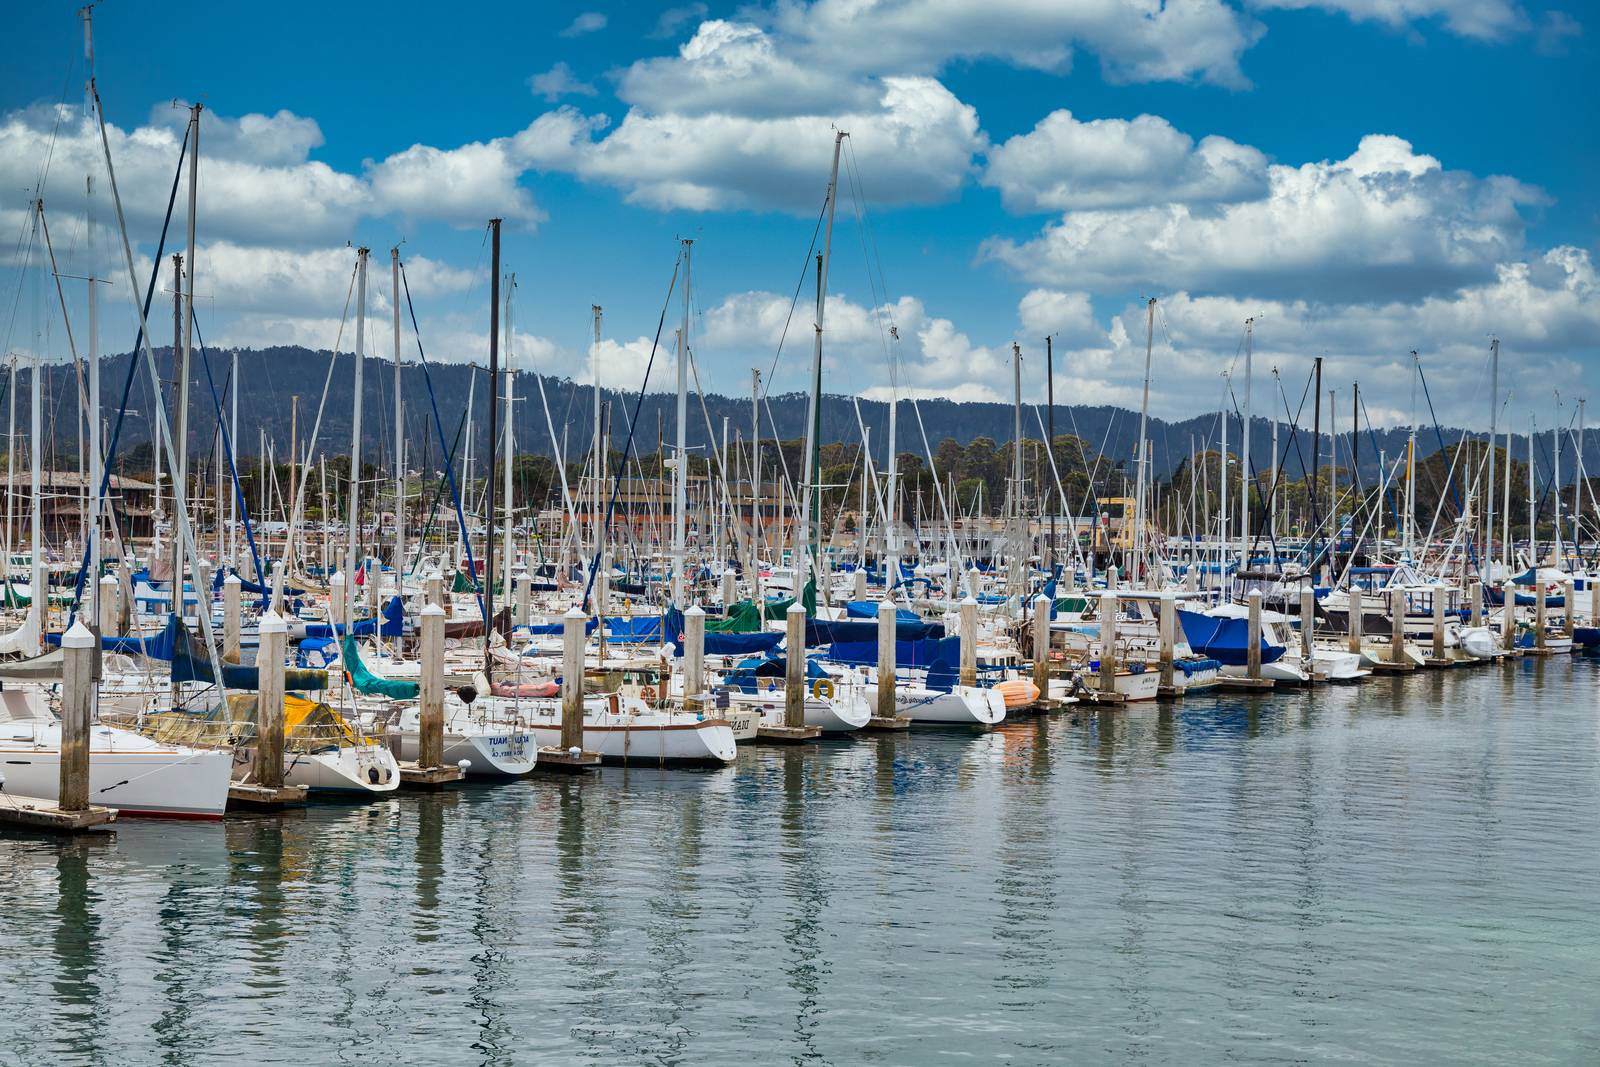 Rows of fishing boats and yachts in Monterey Harbor